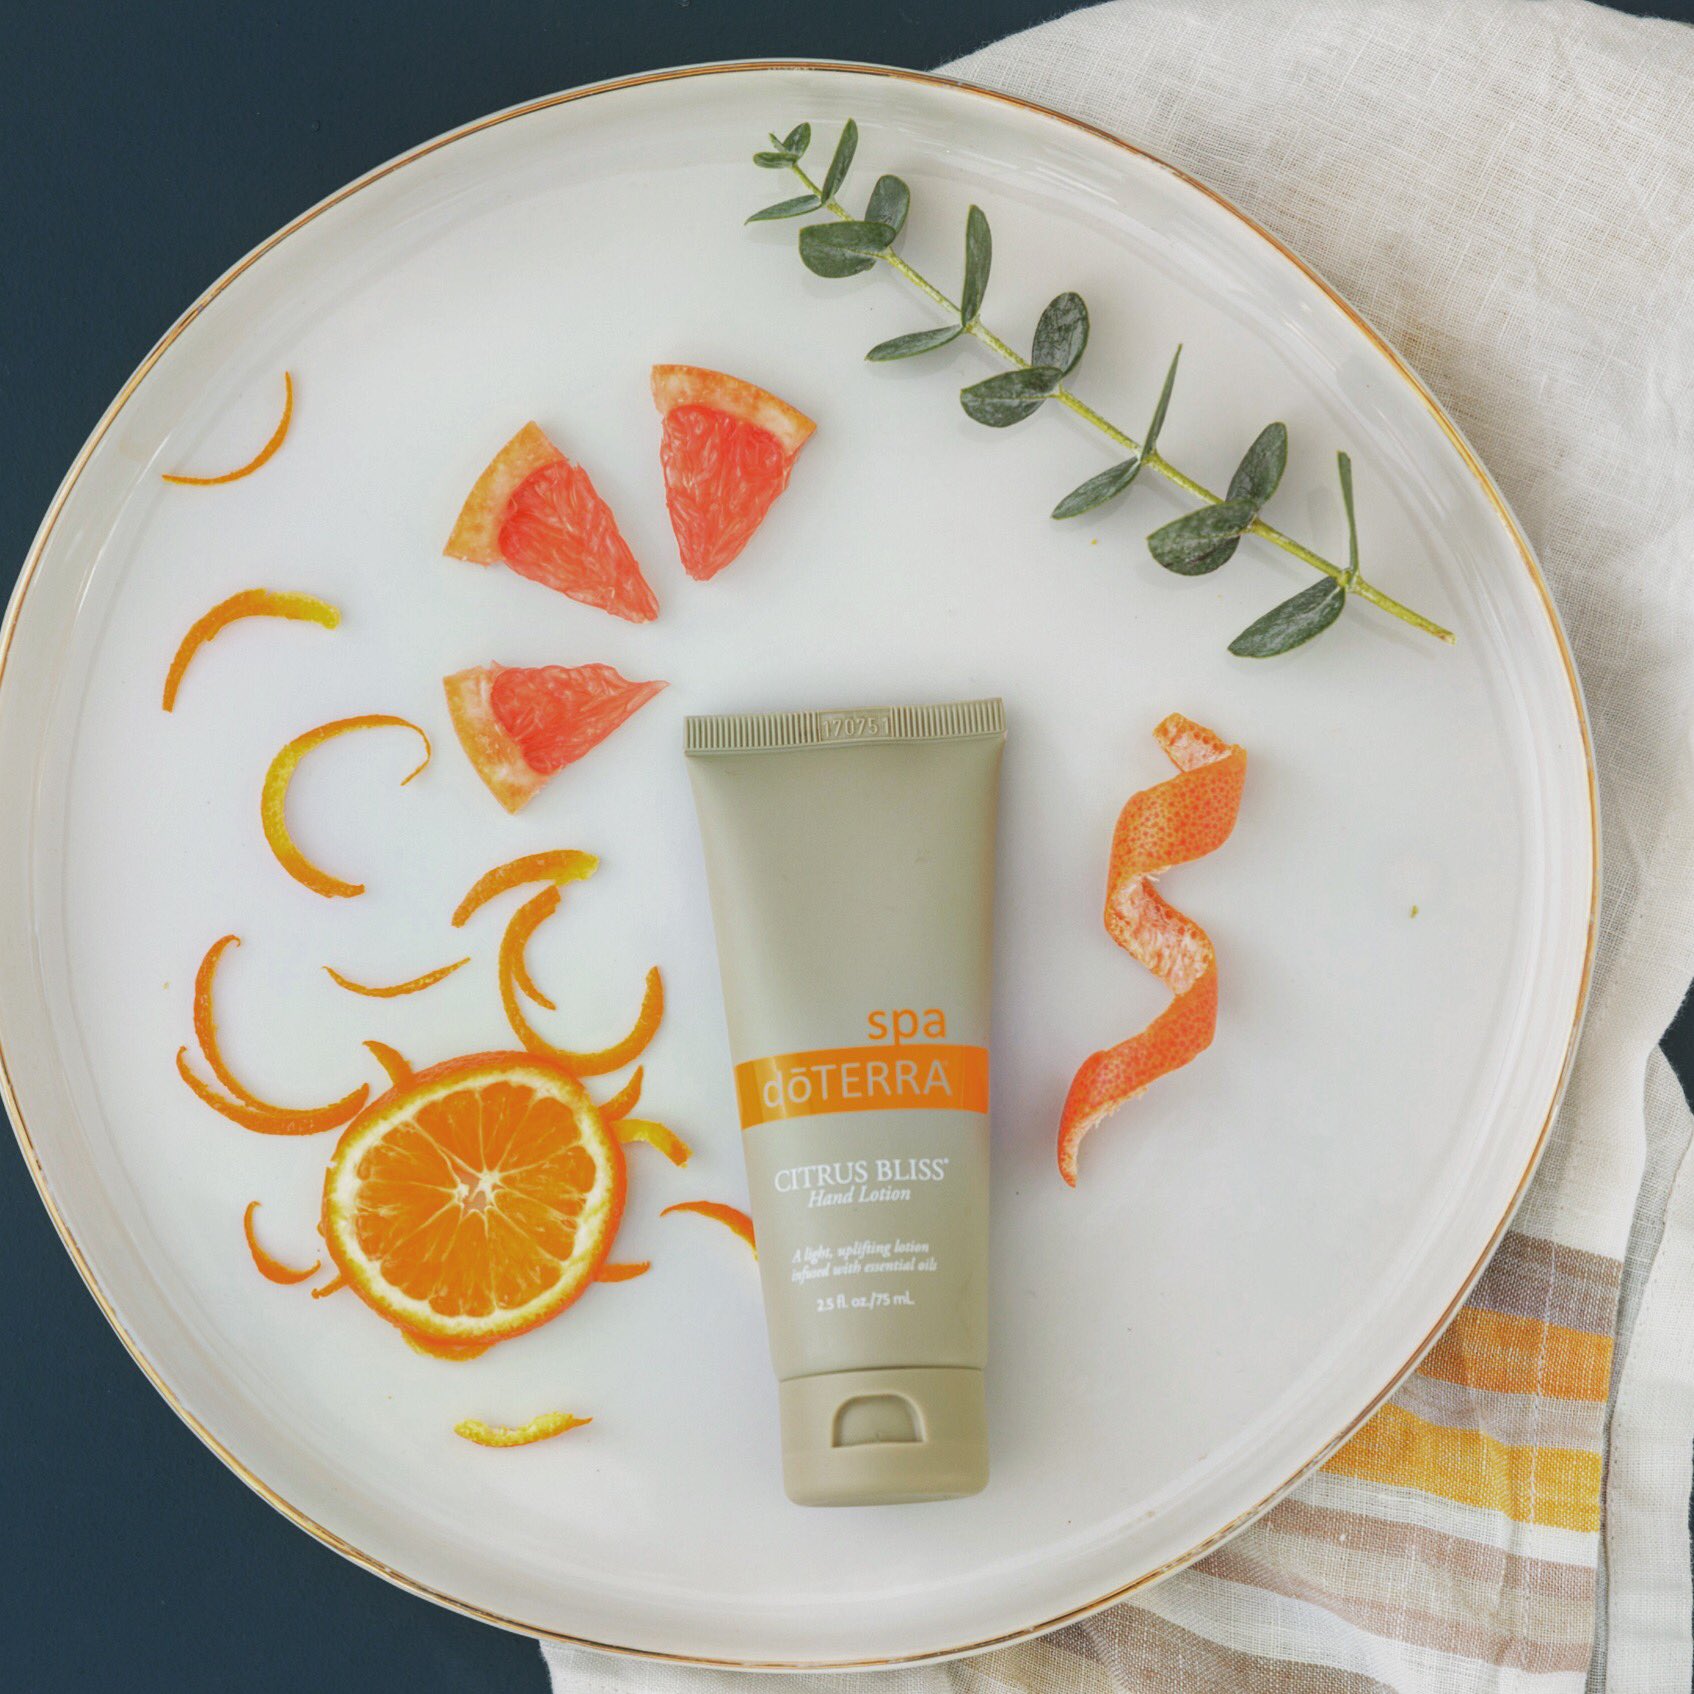 💖Goddess Vibes🤗 on Twitter: This silky, natural lotion, absorbs quickly🍃 I love this lotion from dōTERRA😊#CitrusBliss #Citrus bliss #SilkySkin #PureOils #TherapeuticOils #SkinRegimen #WellnessAdvocate #SpaTreatment ...